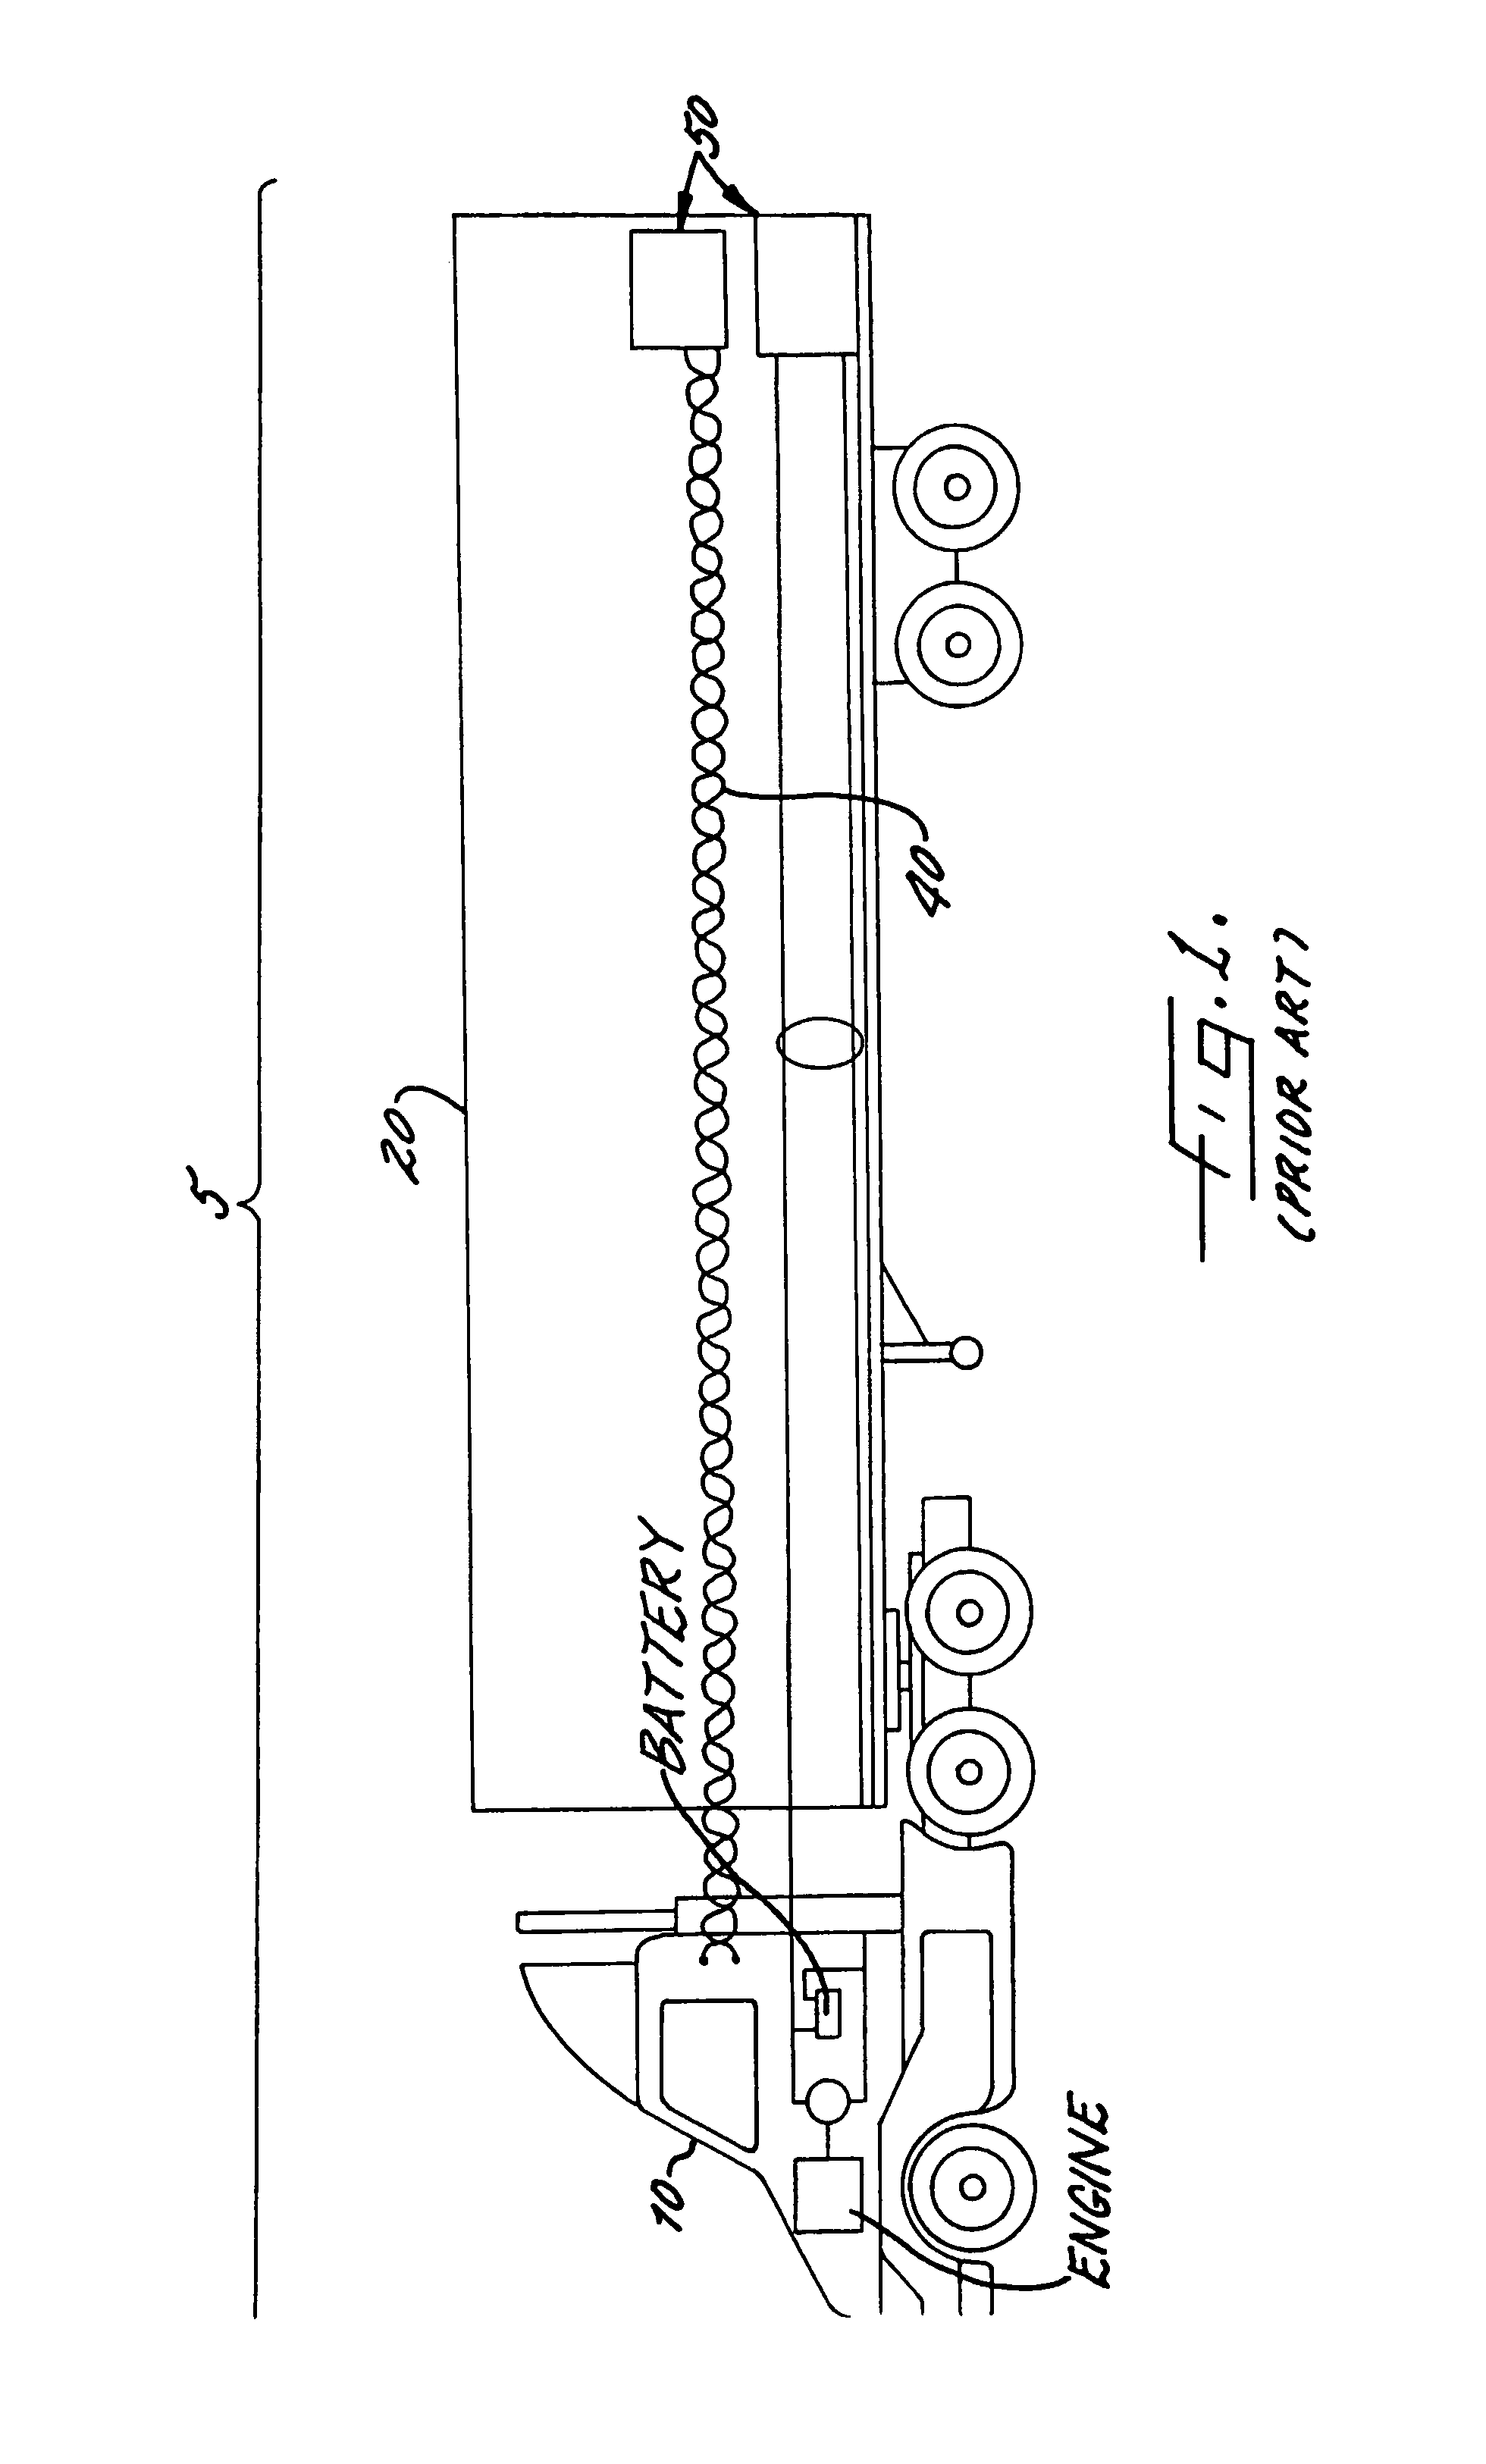 Method for data communication between a vehicle and a remote terminal